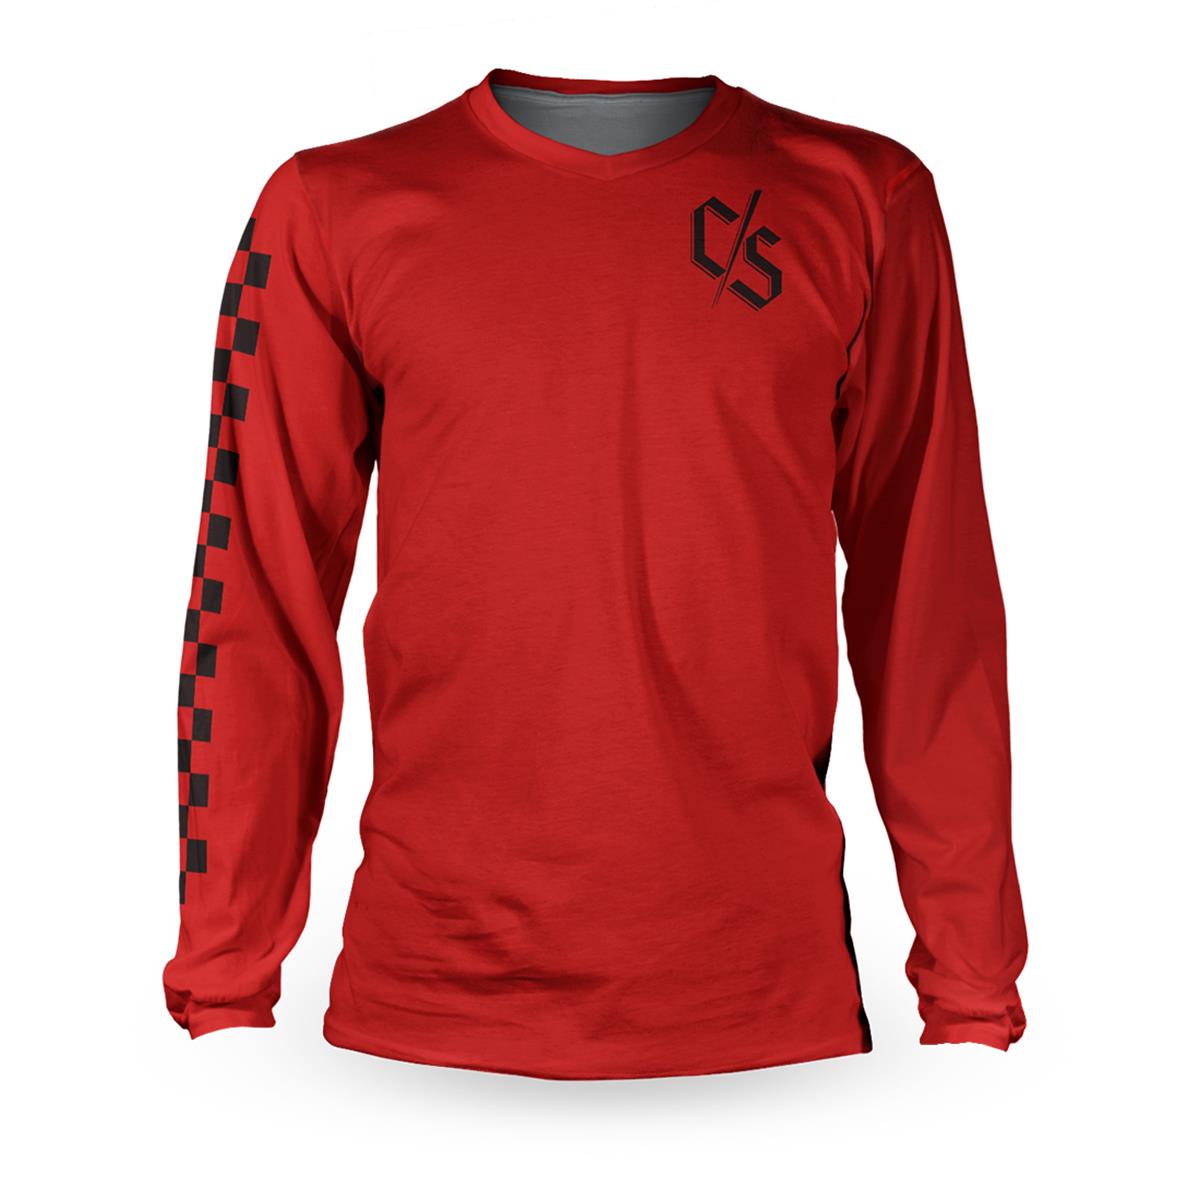 Loose Riders Downhill Jersey Long Sleeve C/S Check Black/Red